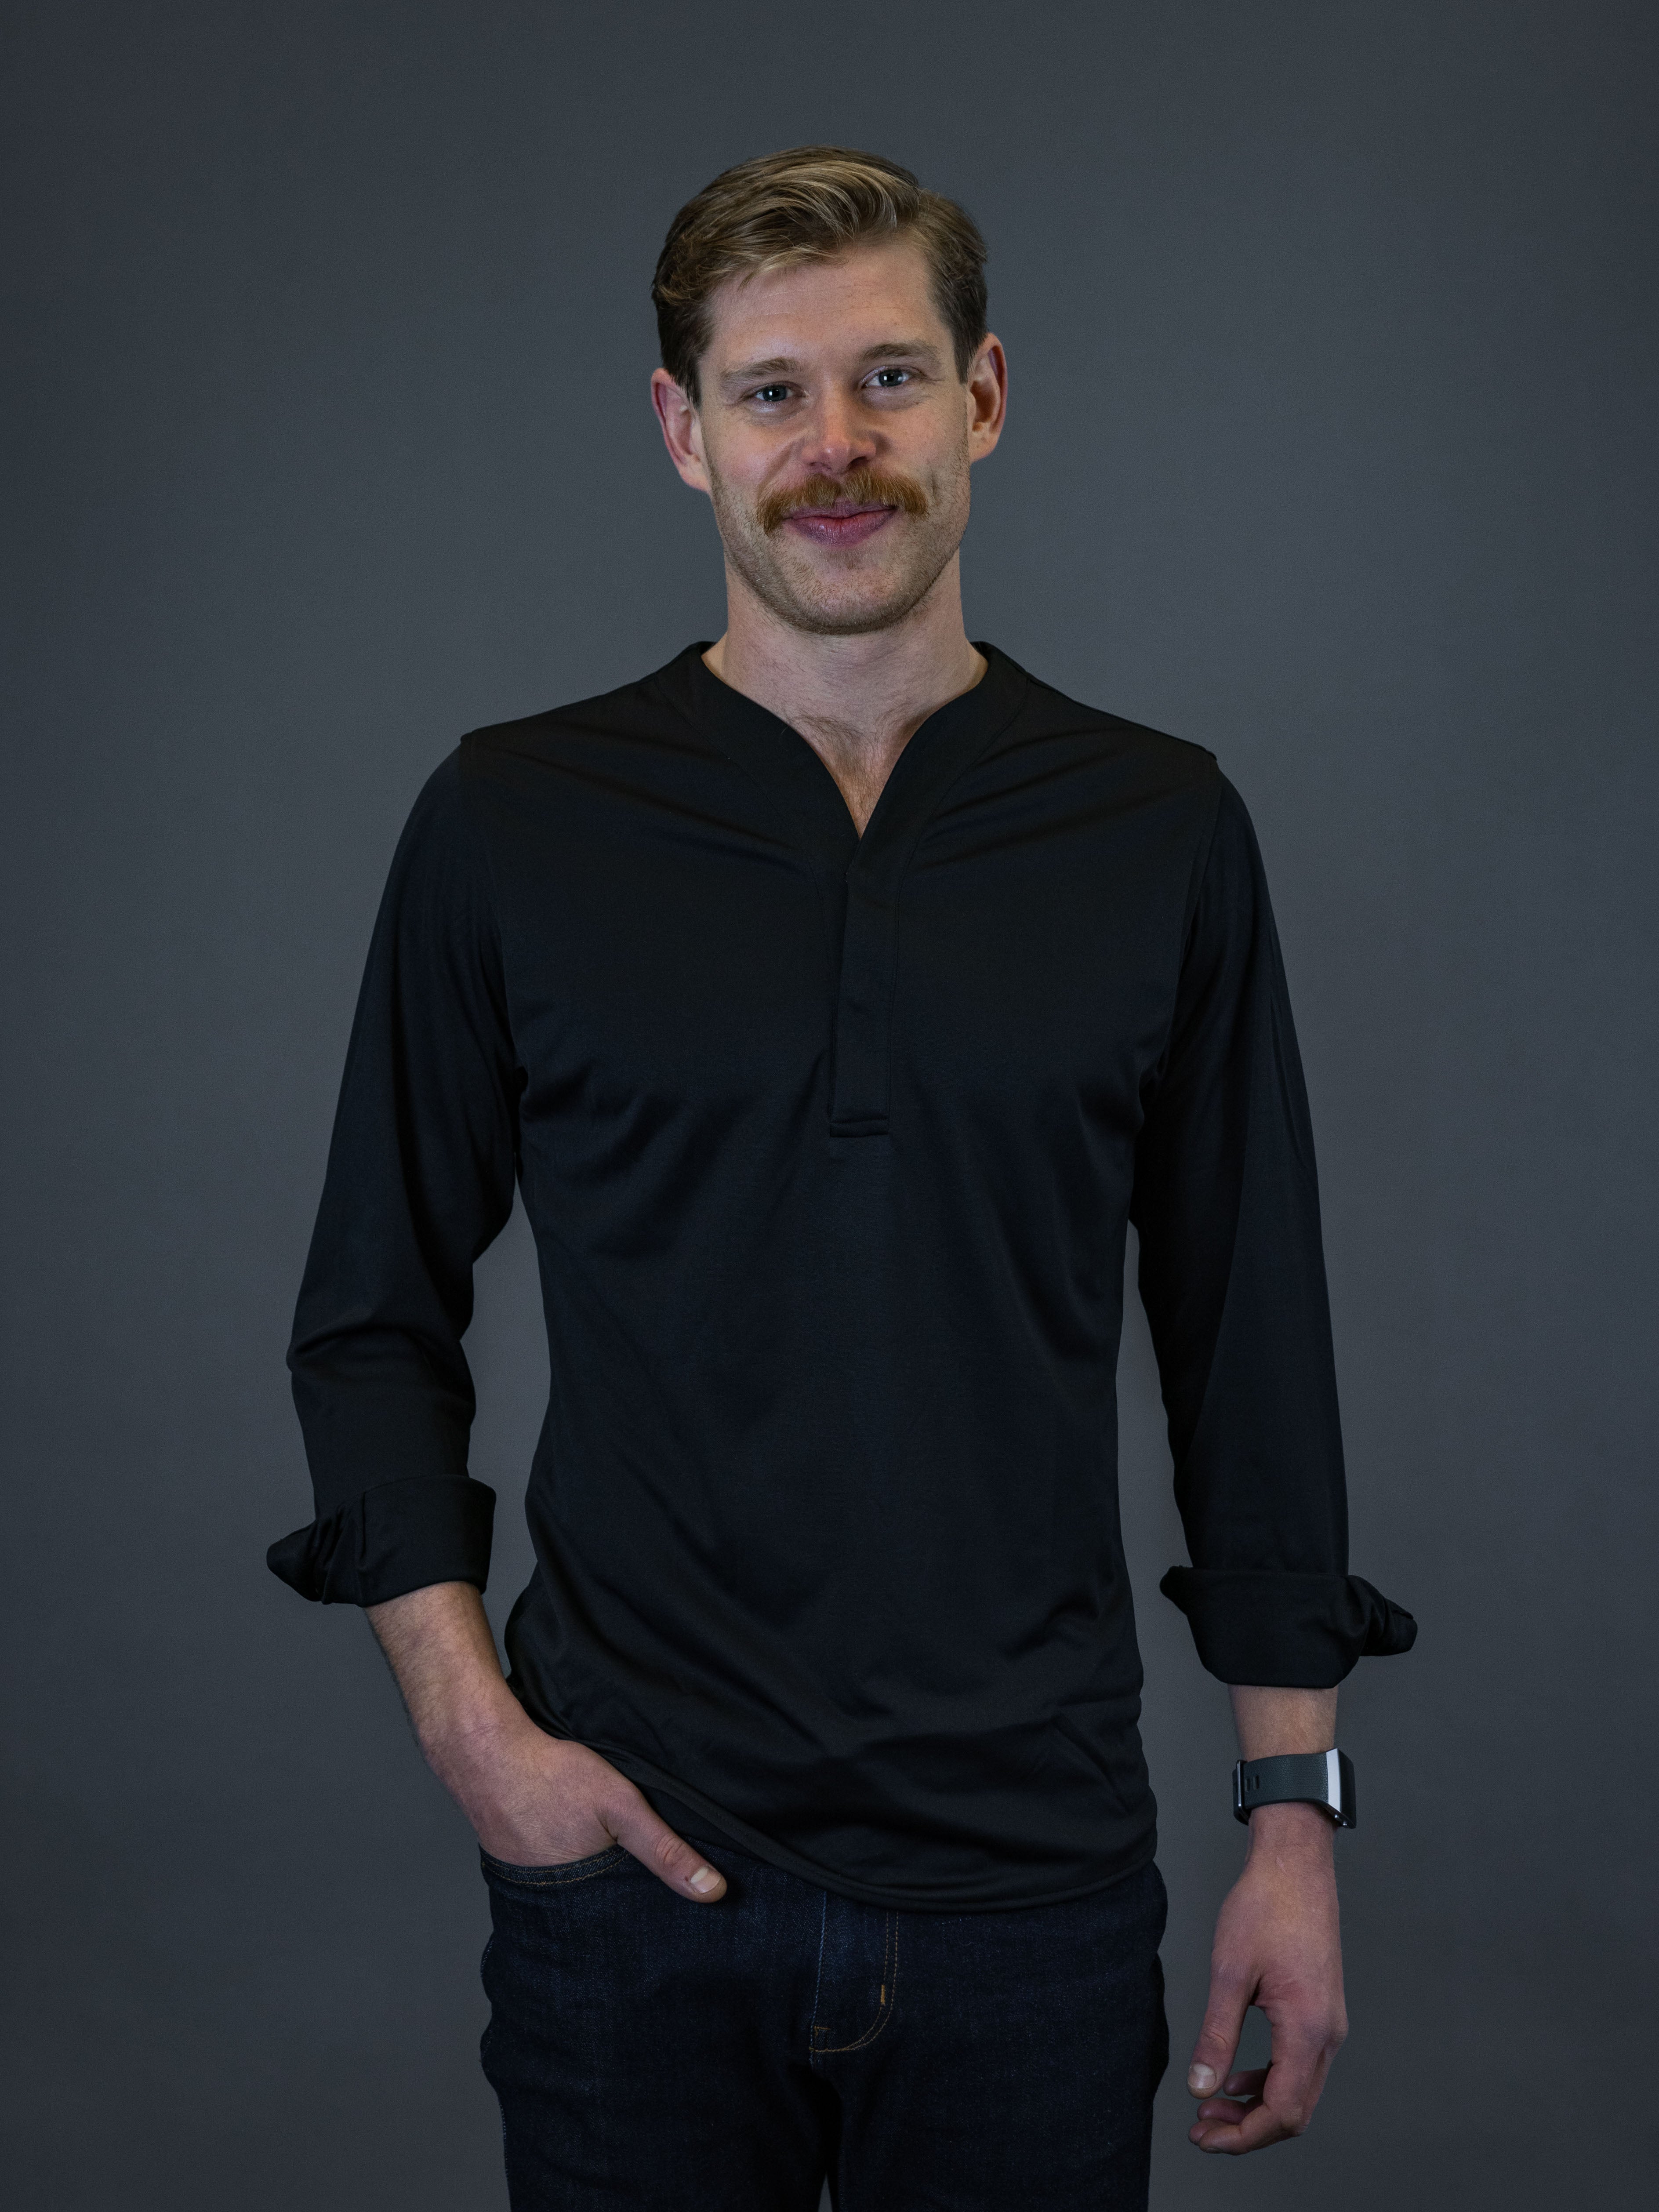 Young man with mustache wearing the cheegs hybrid popover which is part of their collection of casual dress shirts for men